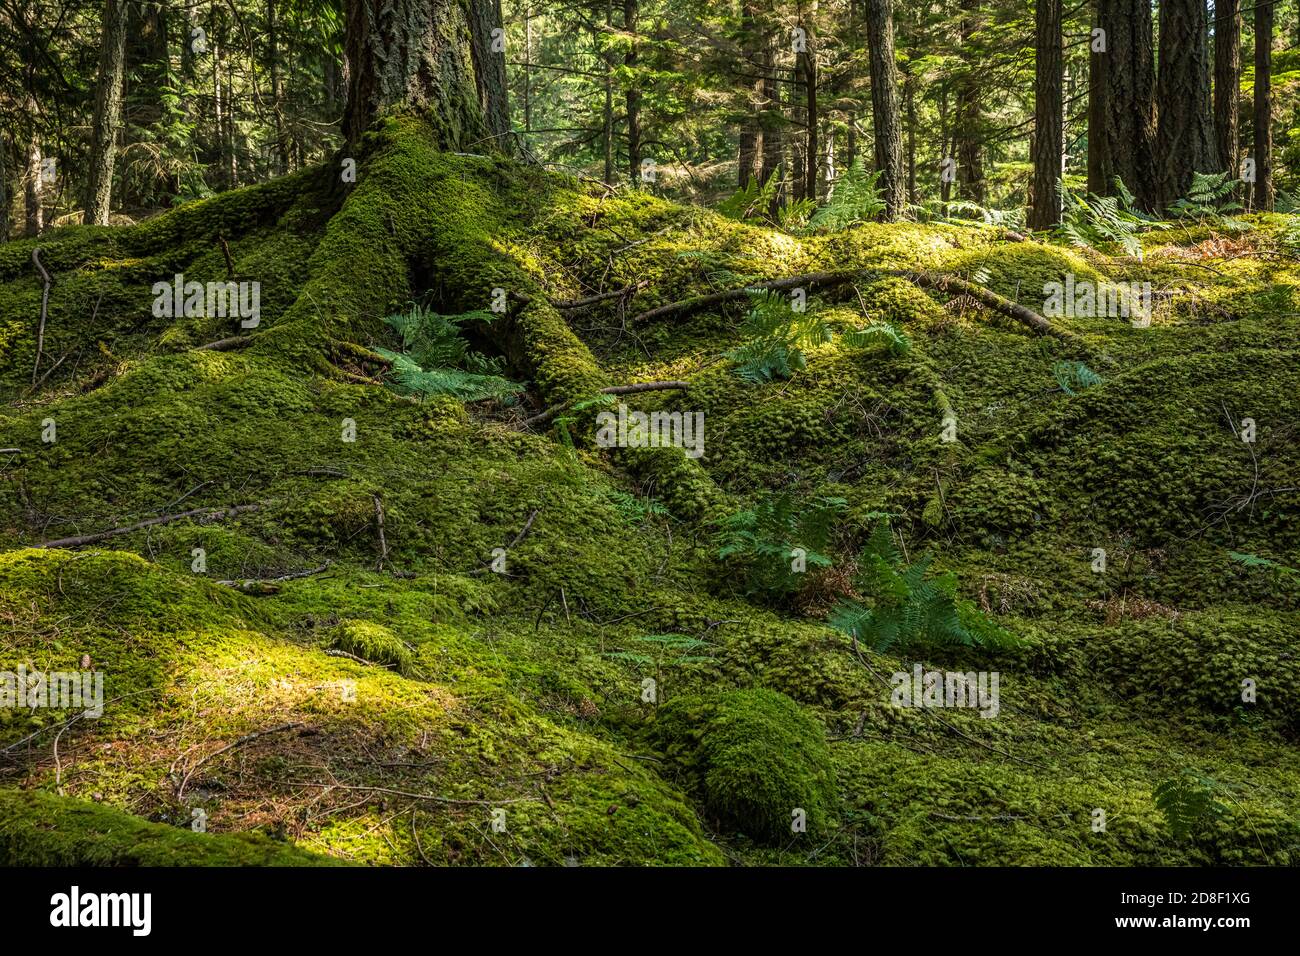 A carpet of moss grows over the forest floor along the Twin Lakes Trail in Moran State Park, Orcas Island, Washington, USA. Stock Photo